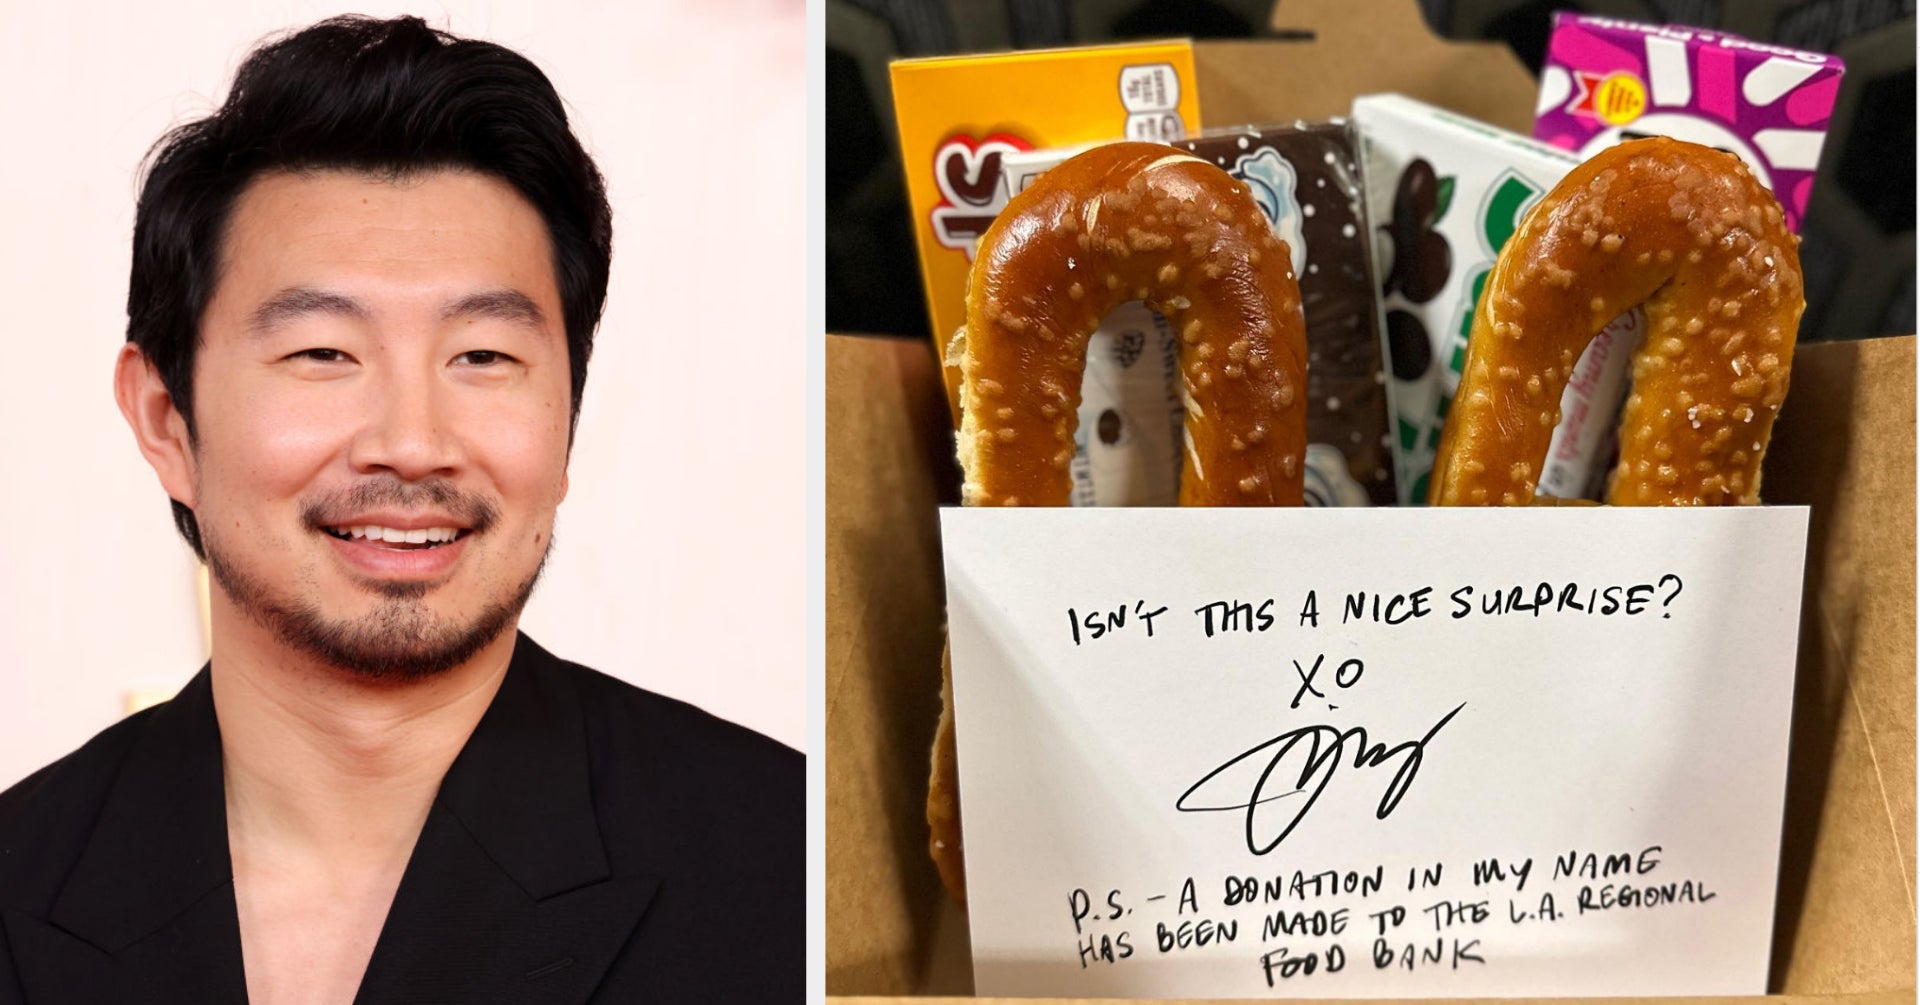 Here's An Inside Look From Simu Liu At The Not Very "Glamorous" Oscars Ceremony Food — And What Was Served At The Oscars Afterparties